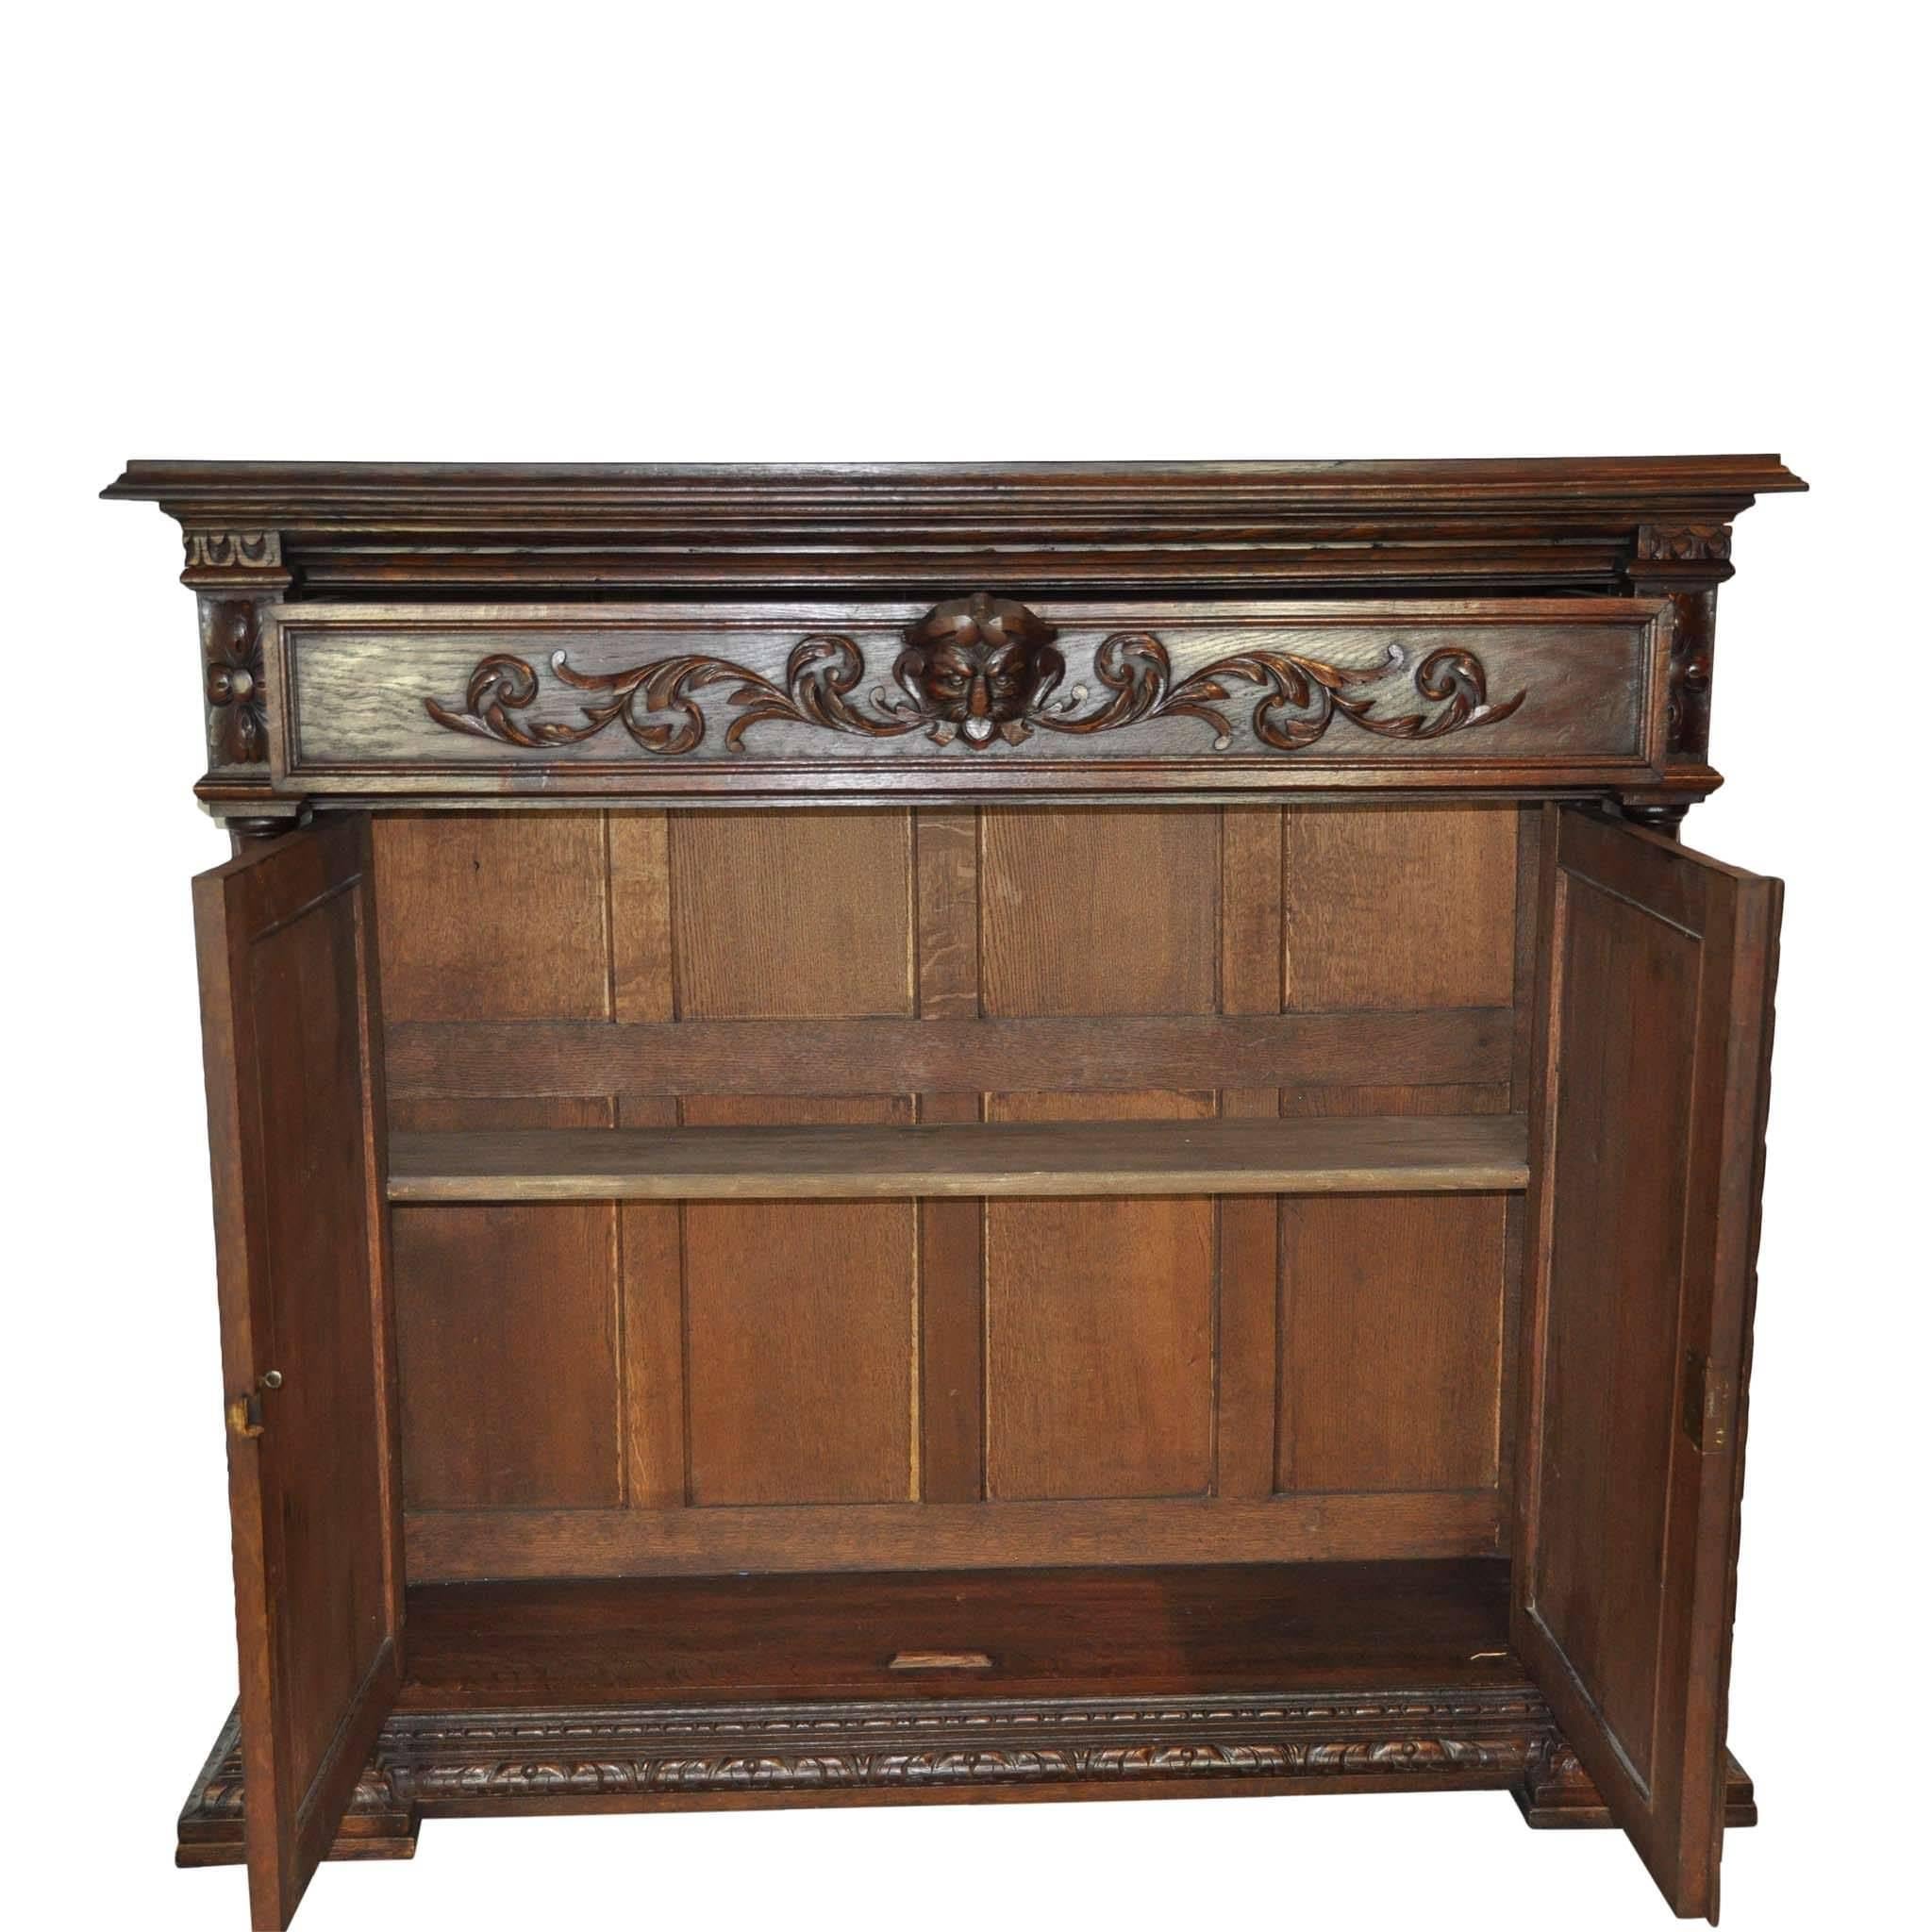 On offer we have a French cabinet carved in a traditional style, where this cabinet stands out from other French cabinetry of its type, is the turned pilasters flanking the cabinet drawers.